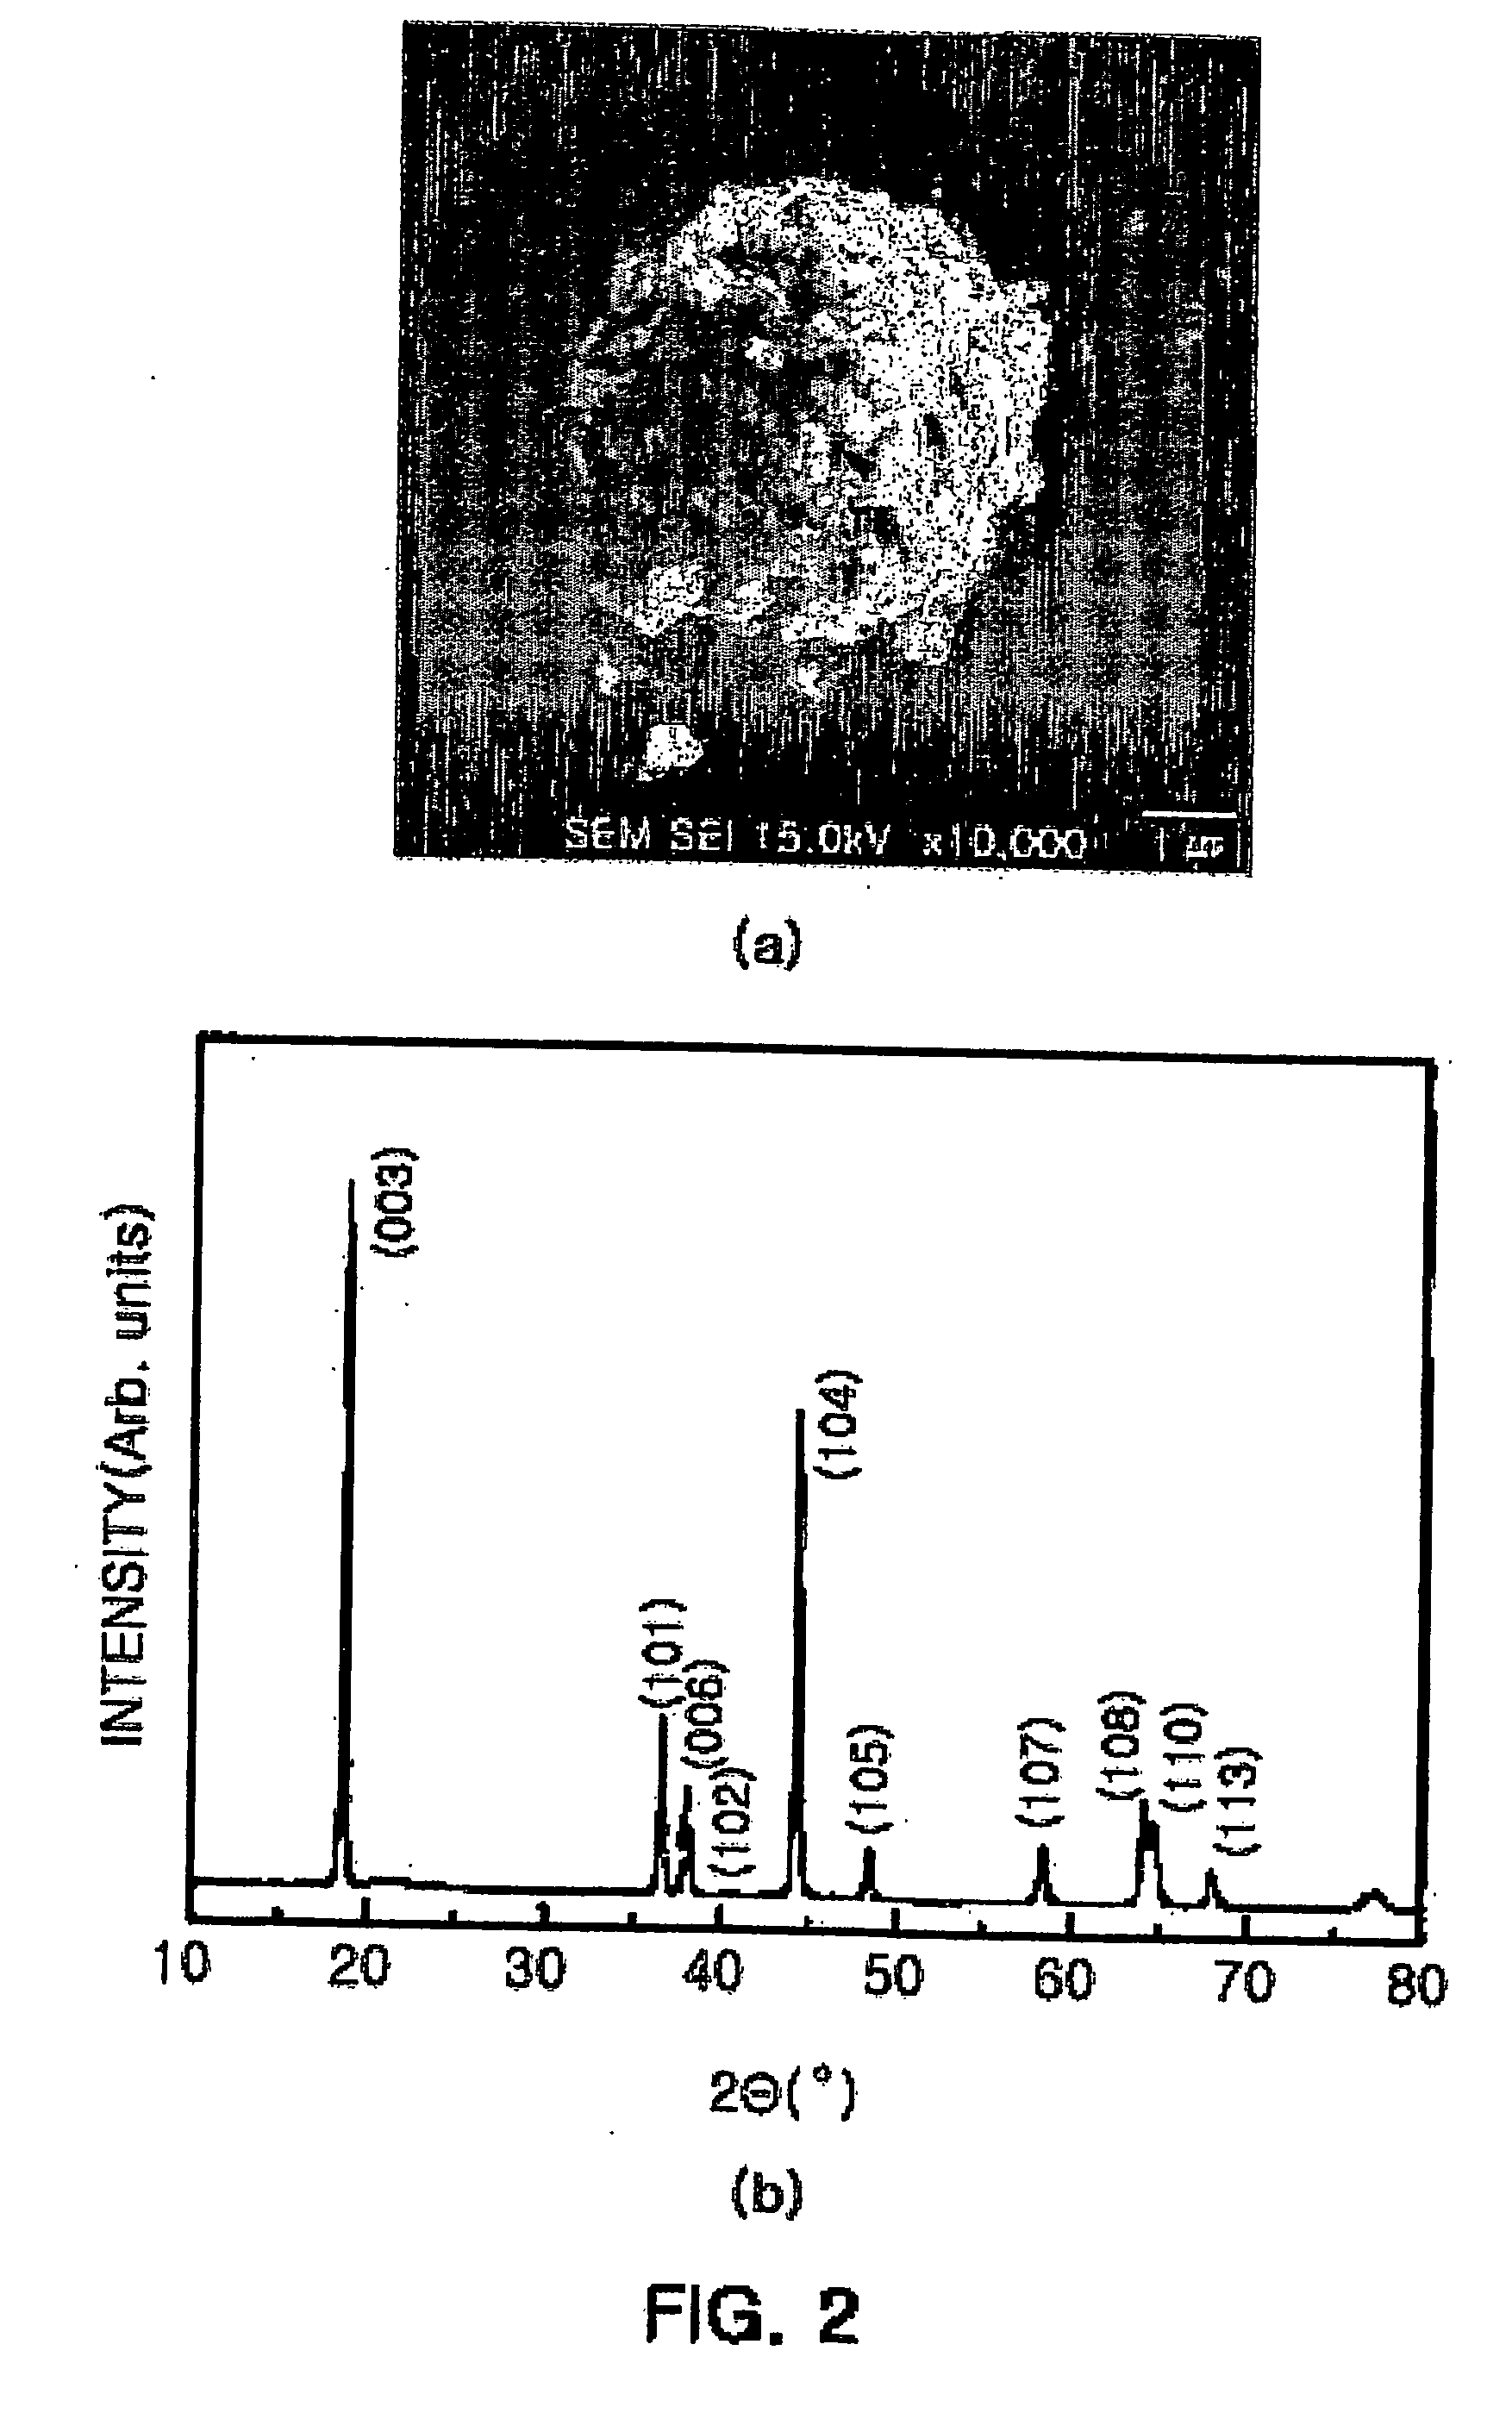 Method for producing lithium composite oxide for use as positive electrode active material for lithium secondary batteries